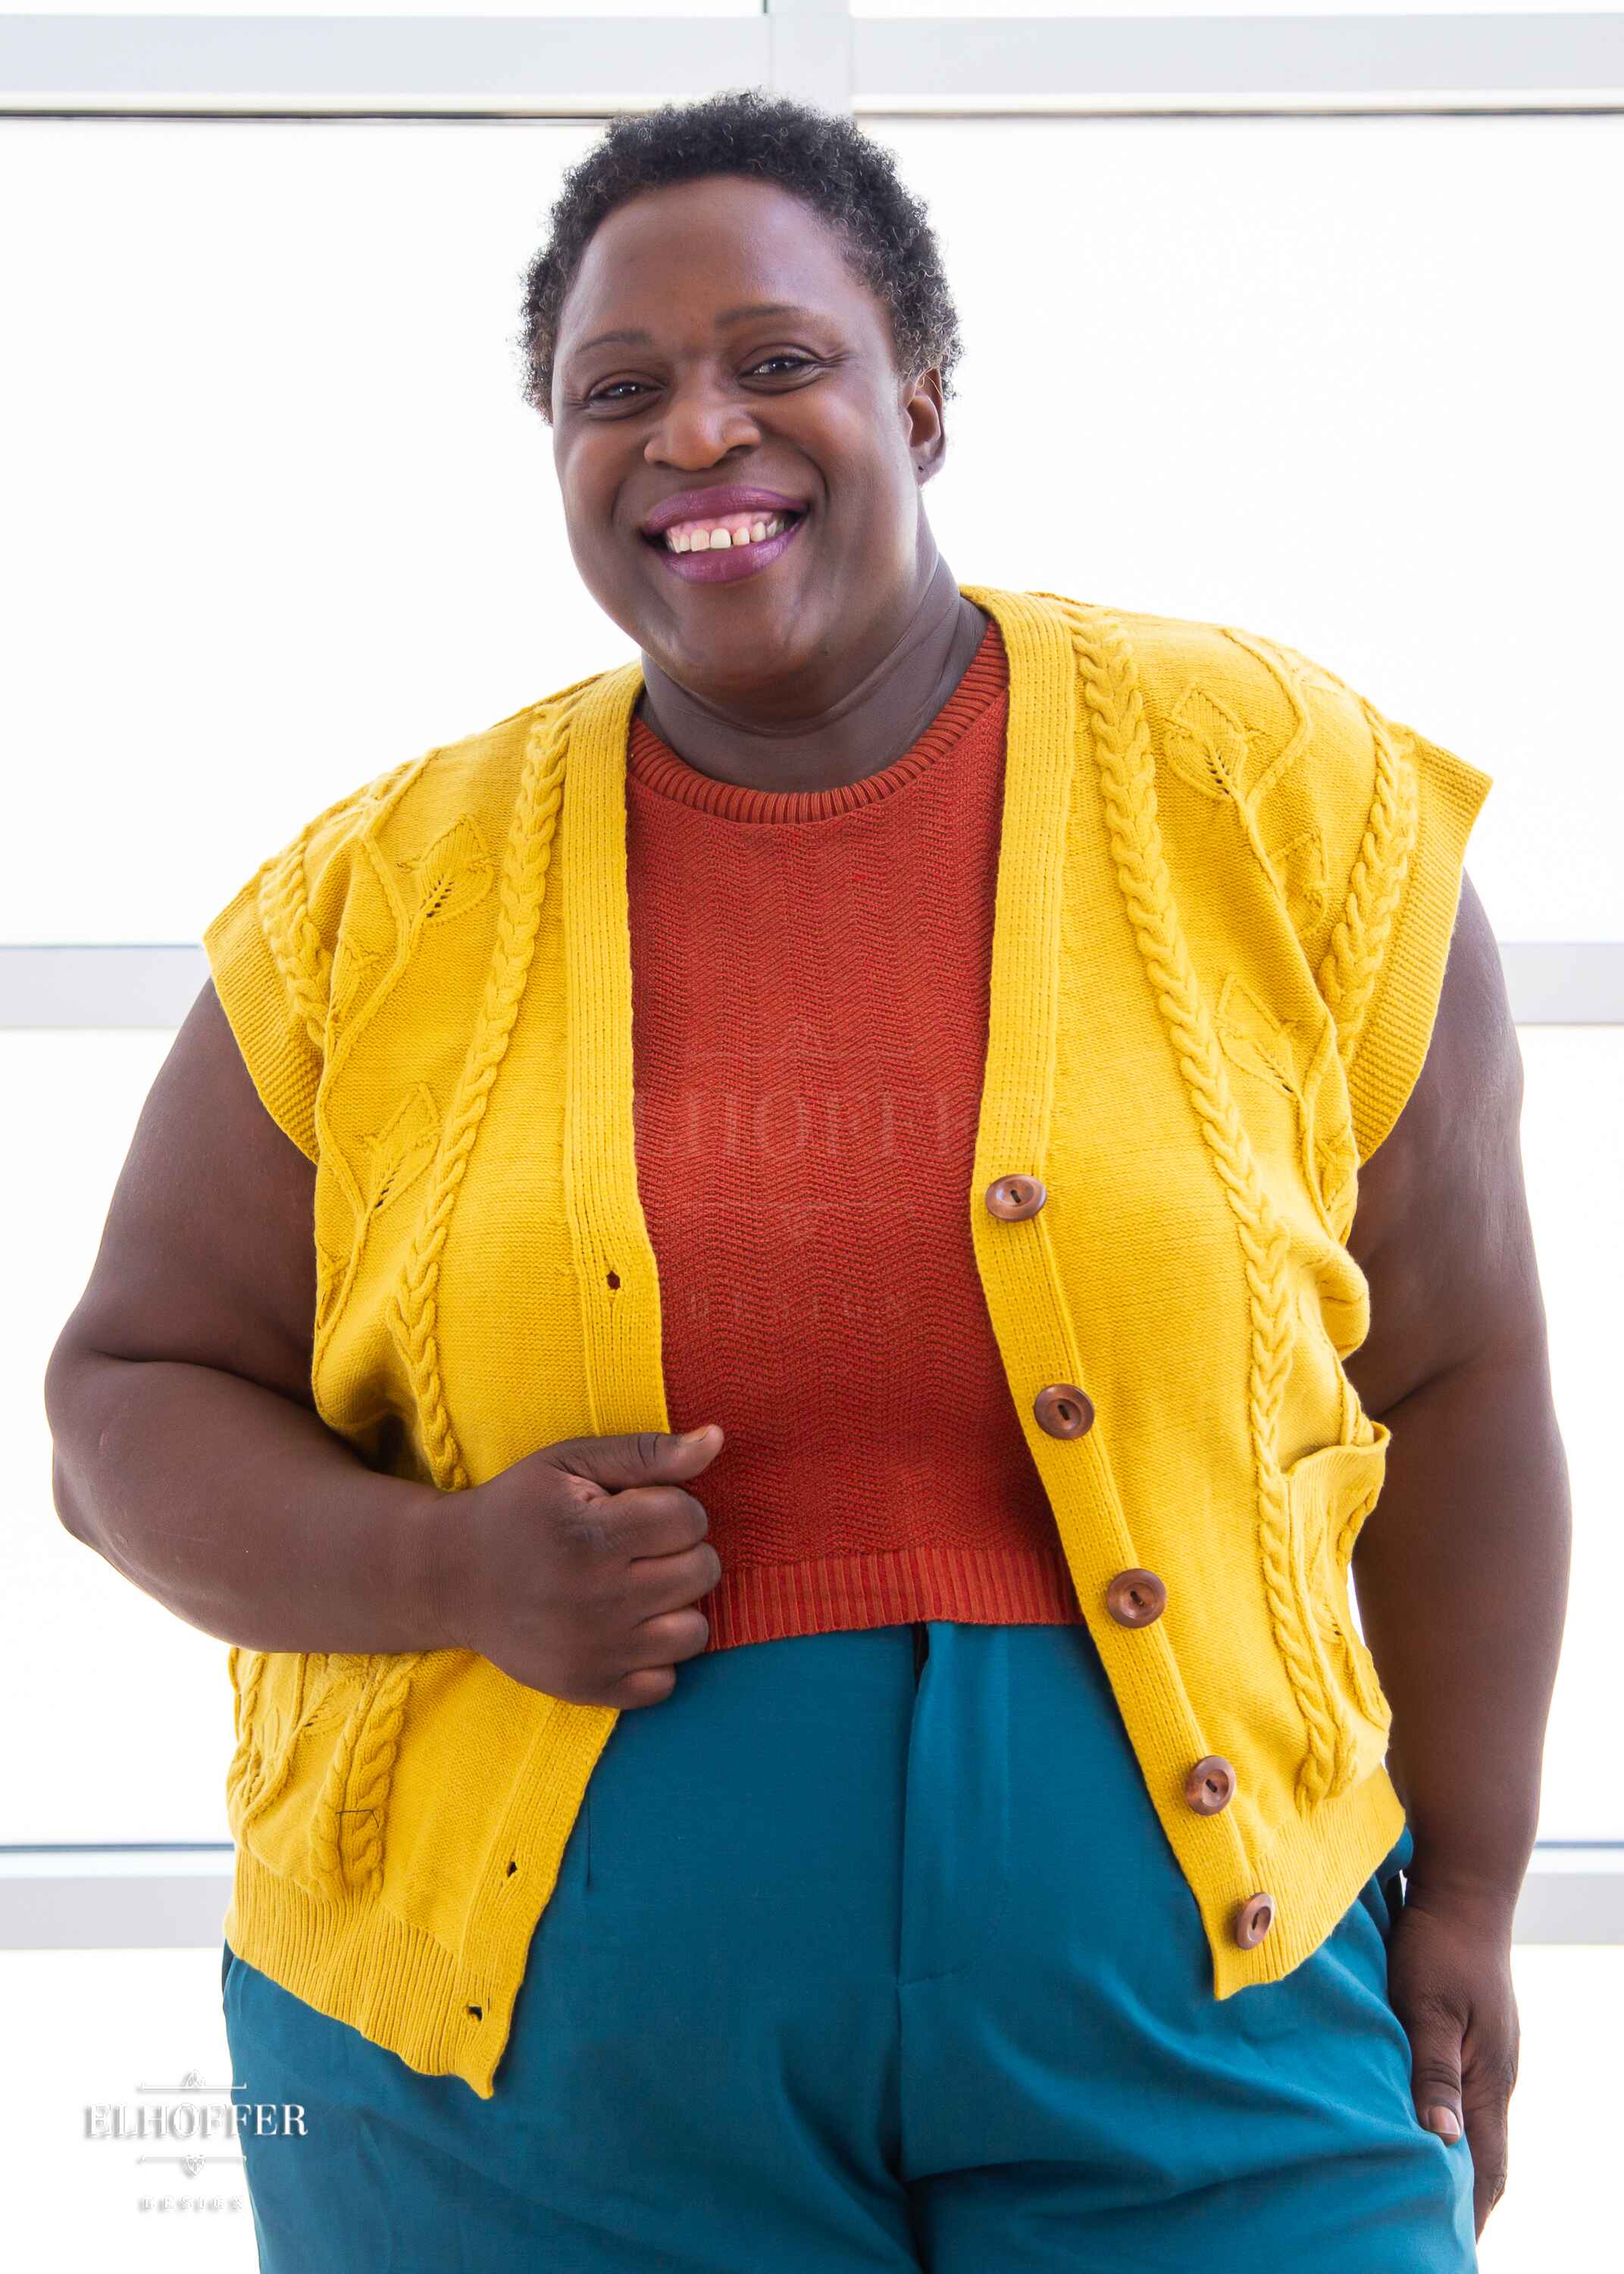 Adalgiza, a dark brown skinned 3xl model with short black tight curly hair, is smiling while wearing a golden yellow button up knit vest with a leafy vine and cable knit pattern, light brown buttons, and front pockets. She paired the vest with a rust color knit crop top and peacock teal trousers.